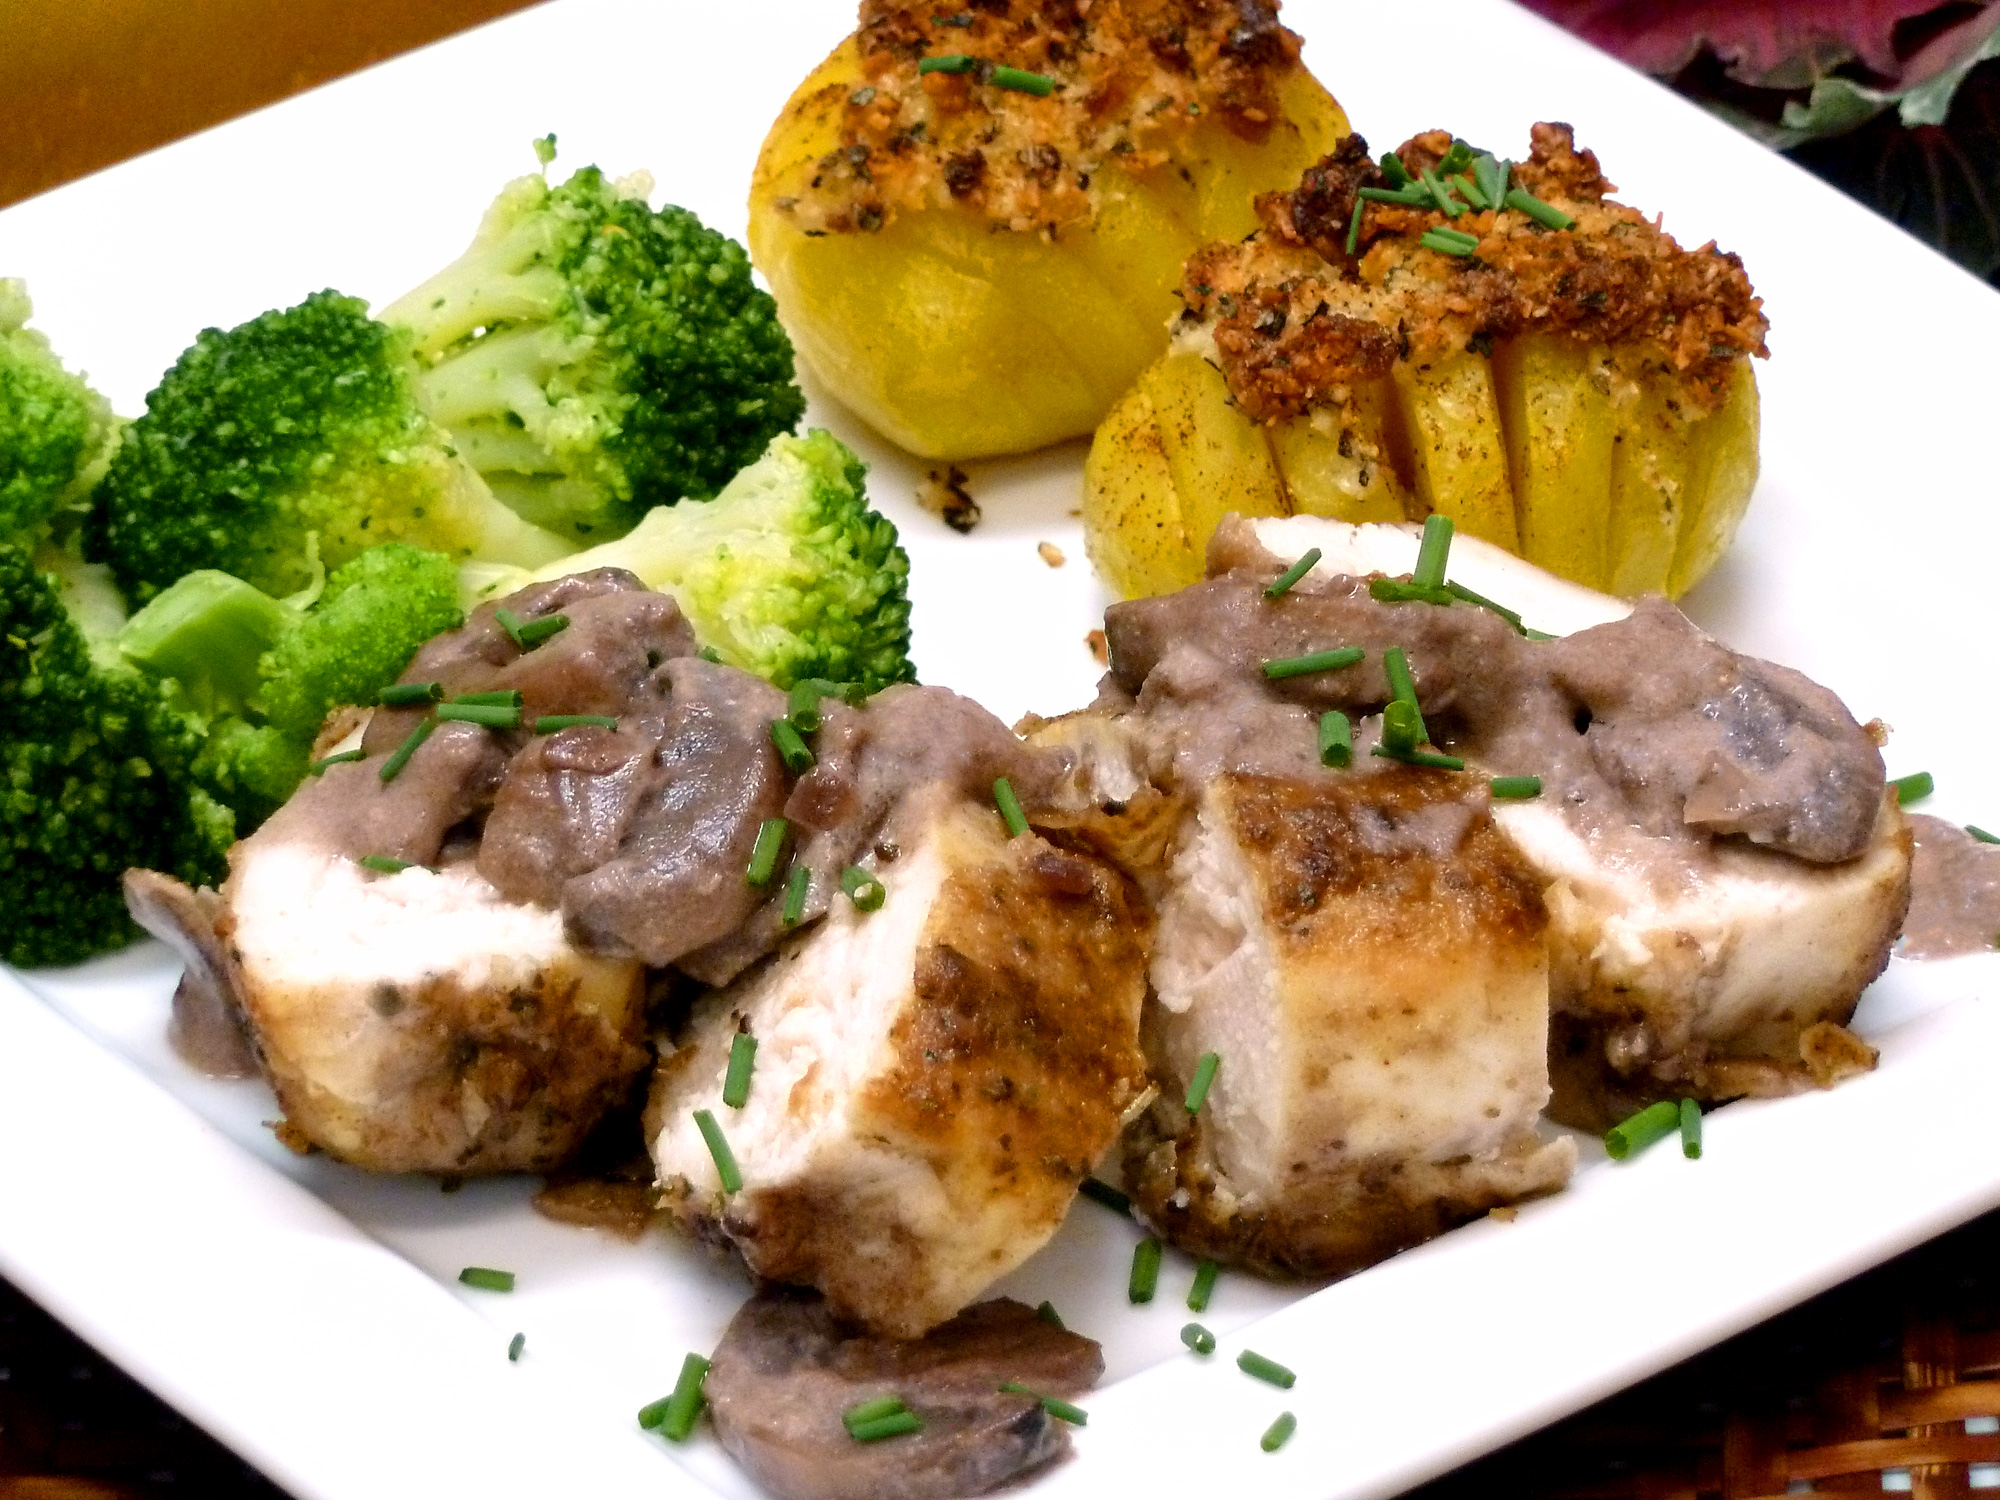 Merlot Mushroom Chicken takes about 30 minutes to make.